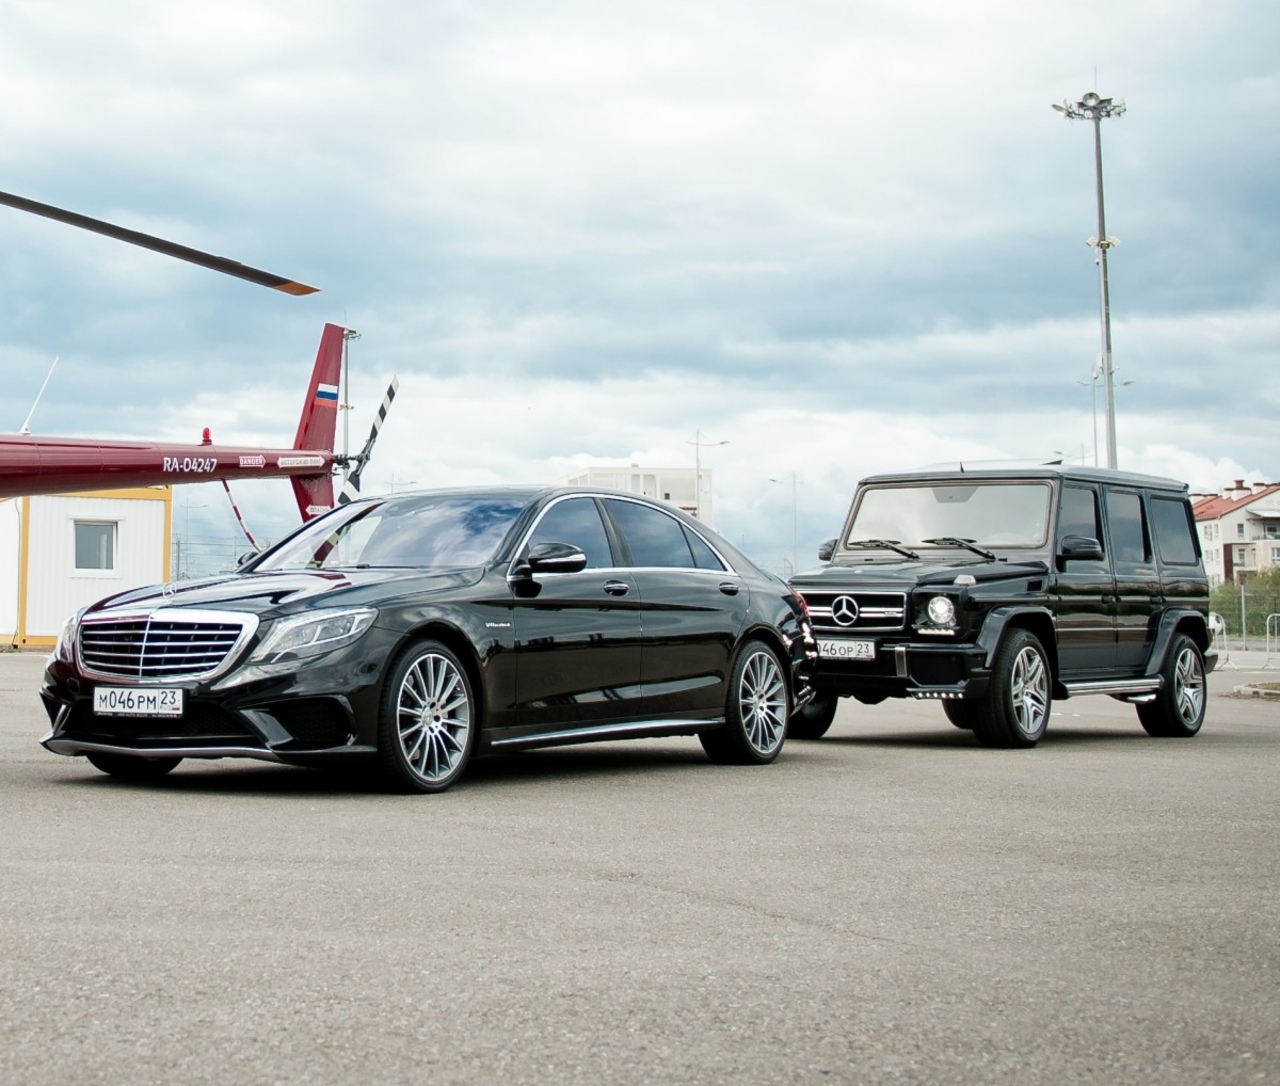 A wide range of Mercedes cars for rent in Sochi from the company Weekend-Sochi